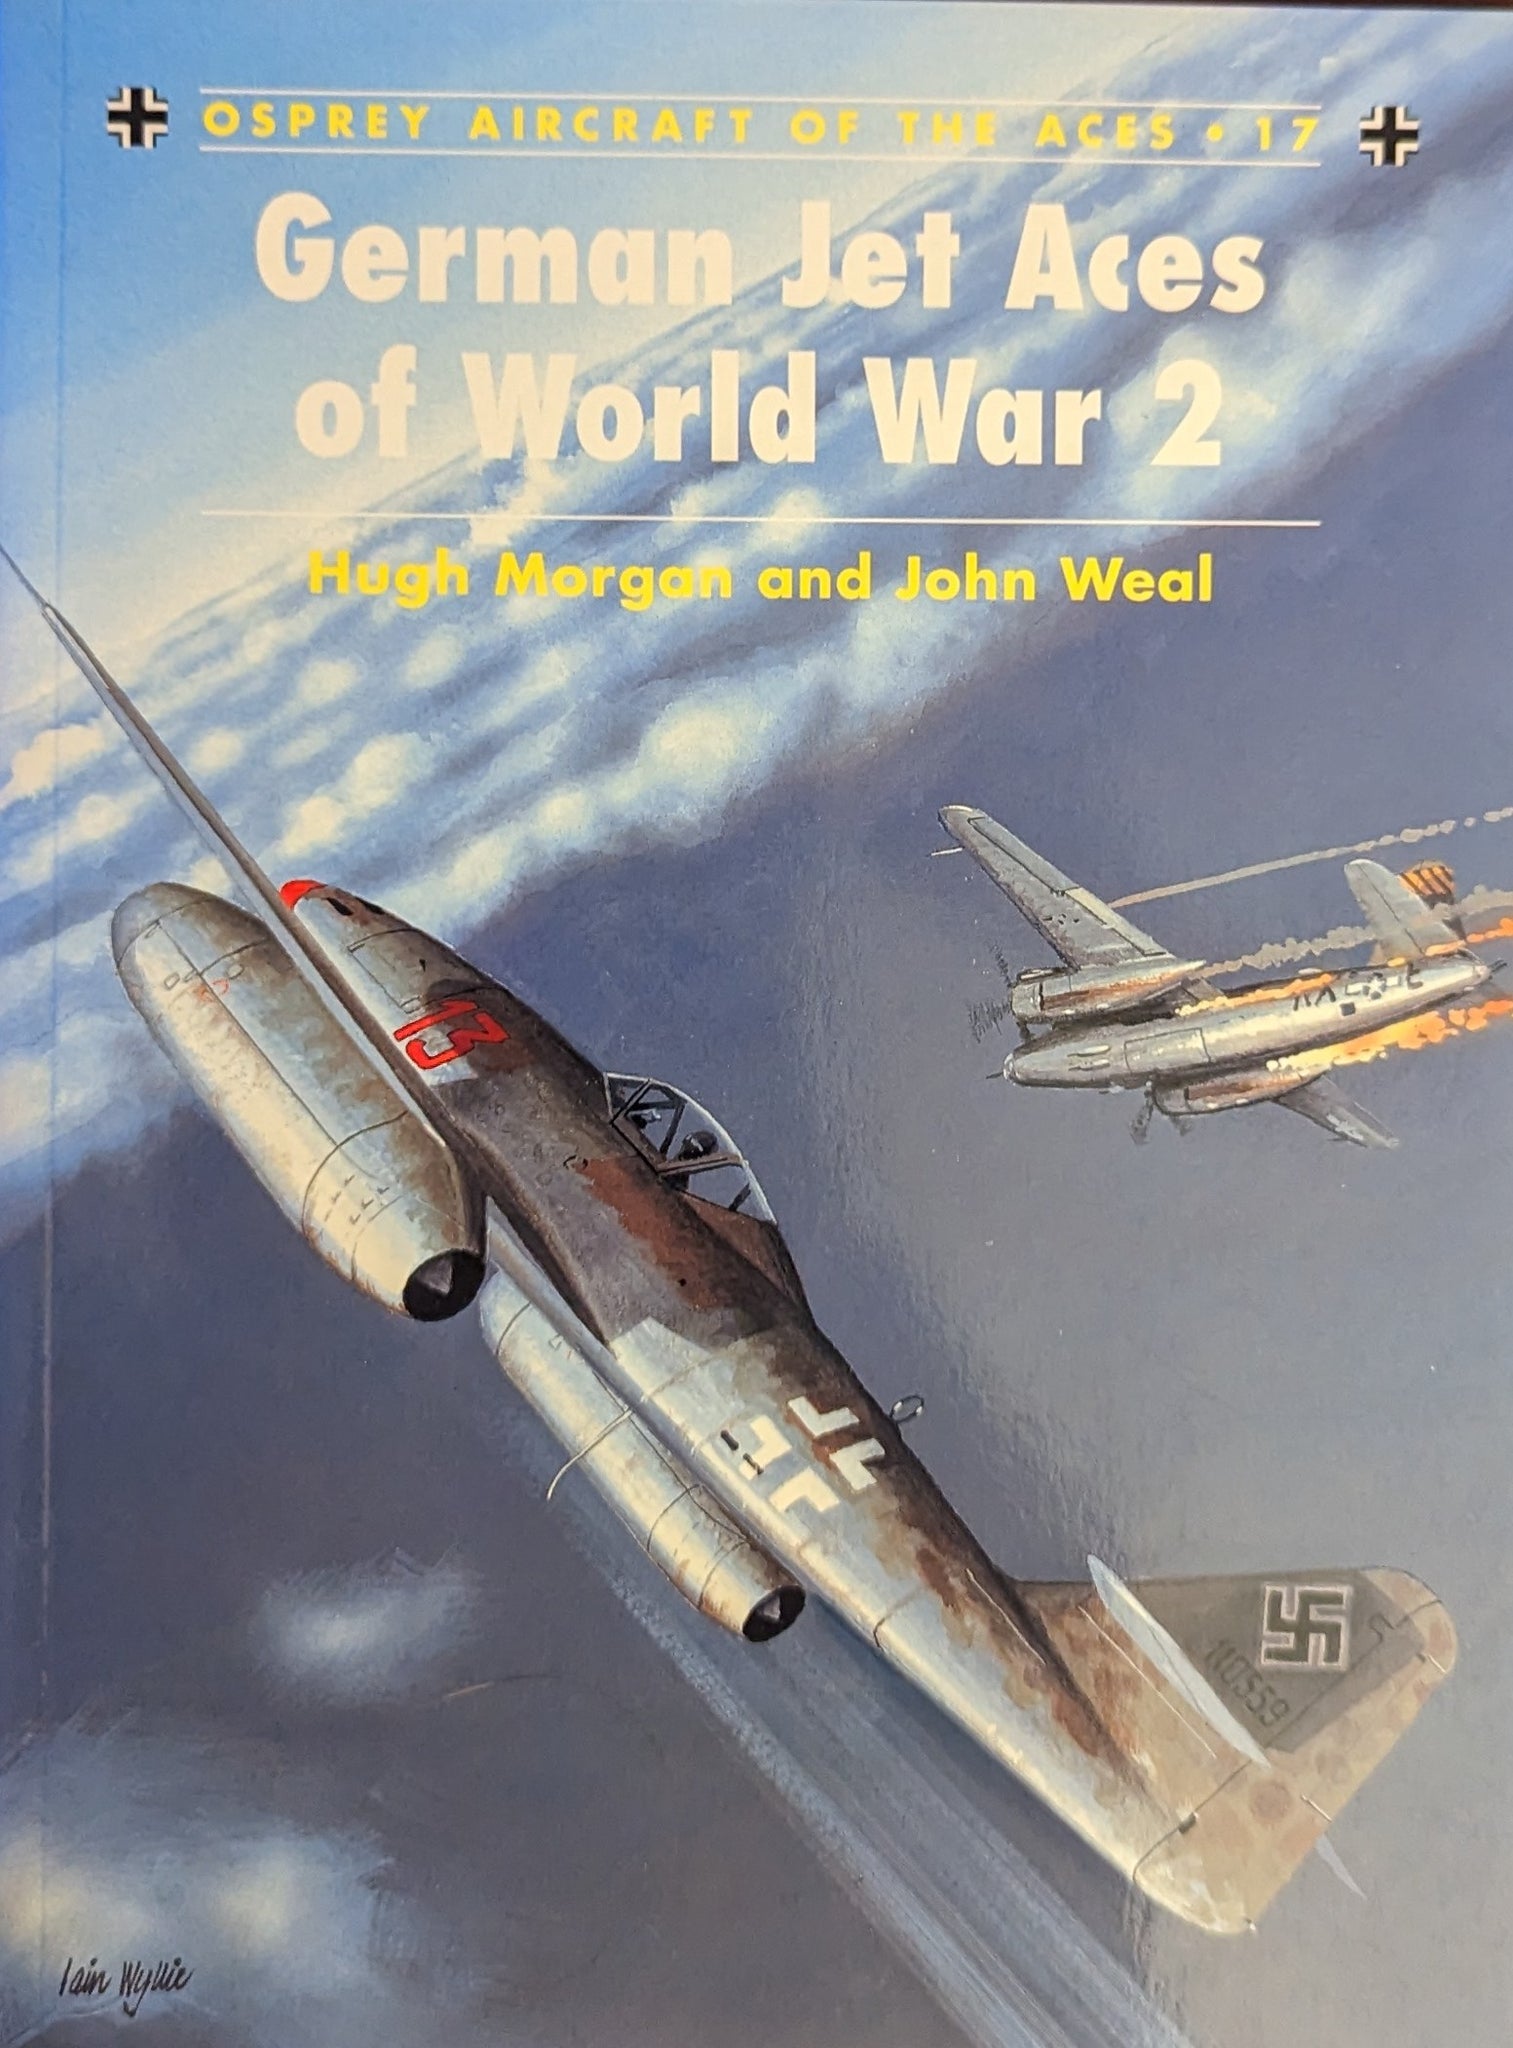 GERMAN JET ACES OF WORLD WAR 2 (Osprey Aircraft of the Aces No 17)